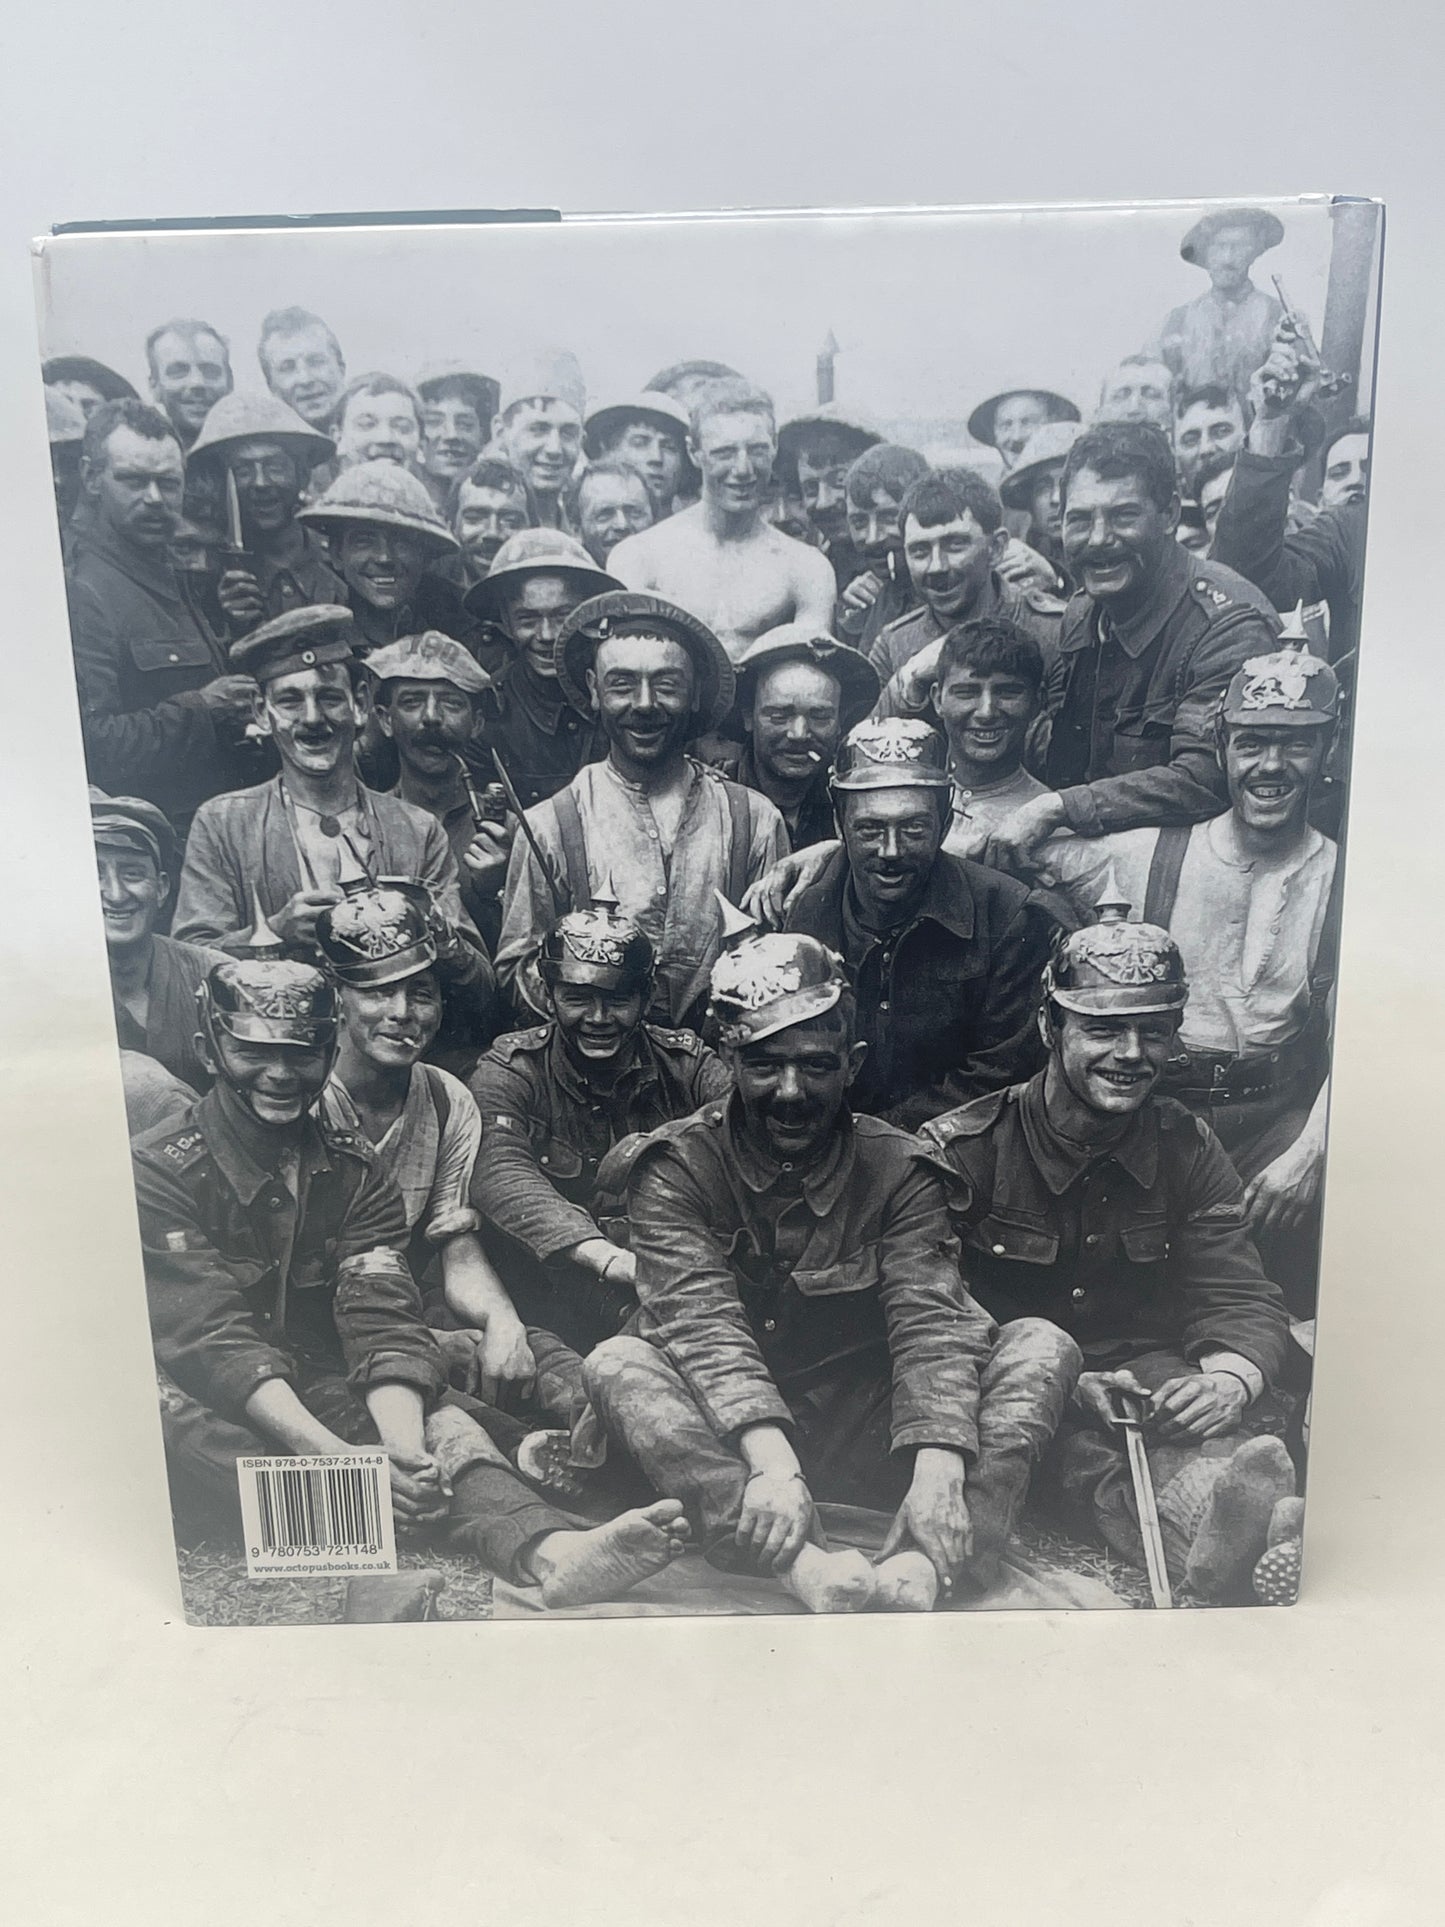 The Faces of World War I  by Max Arthur